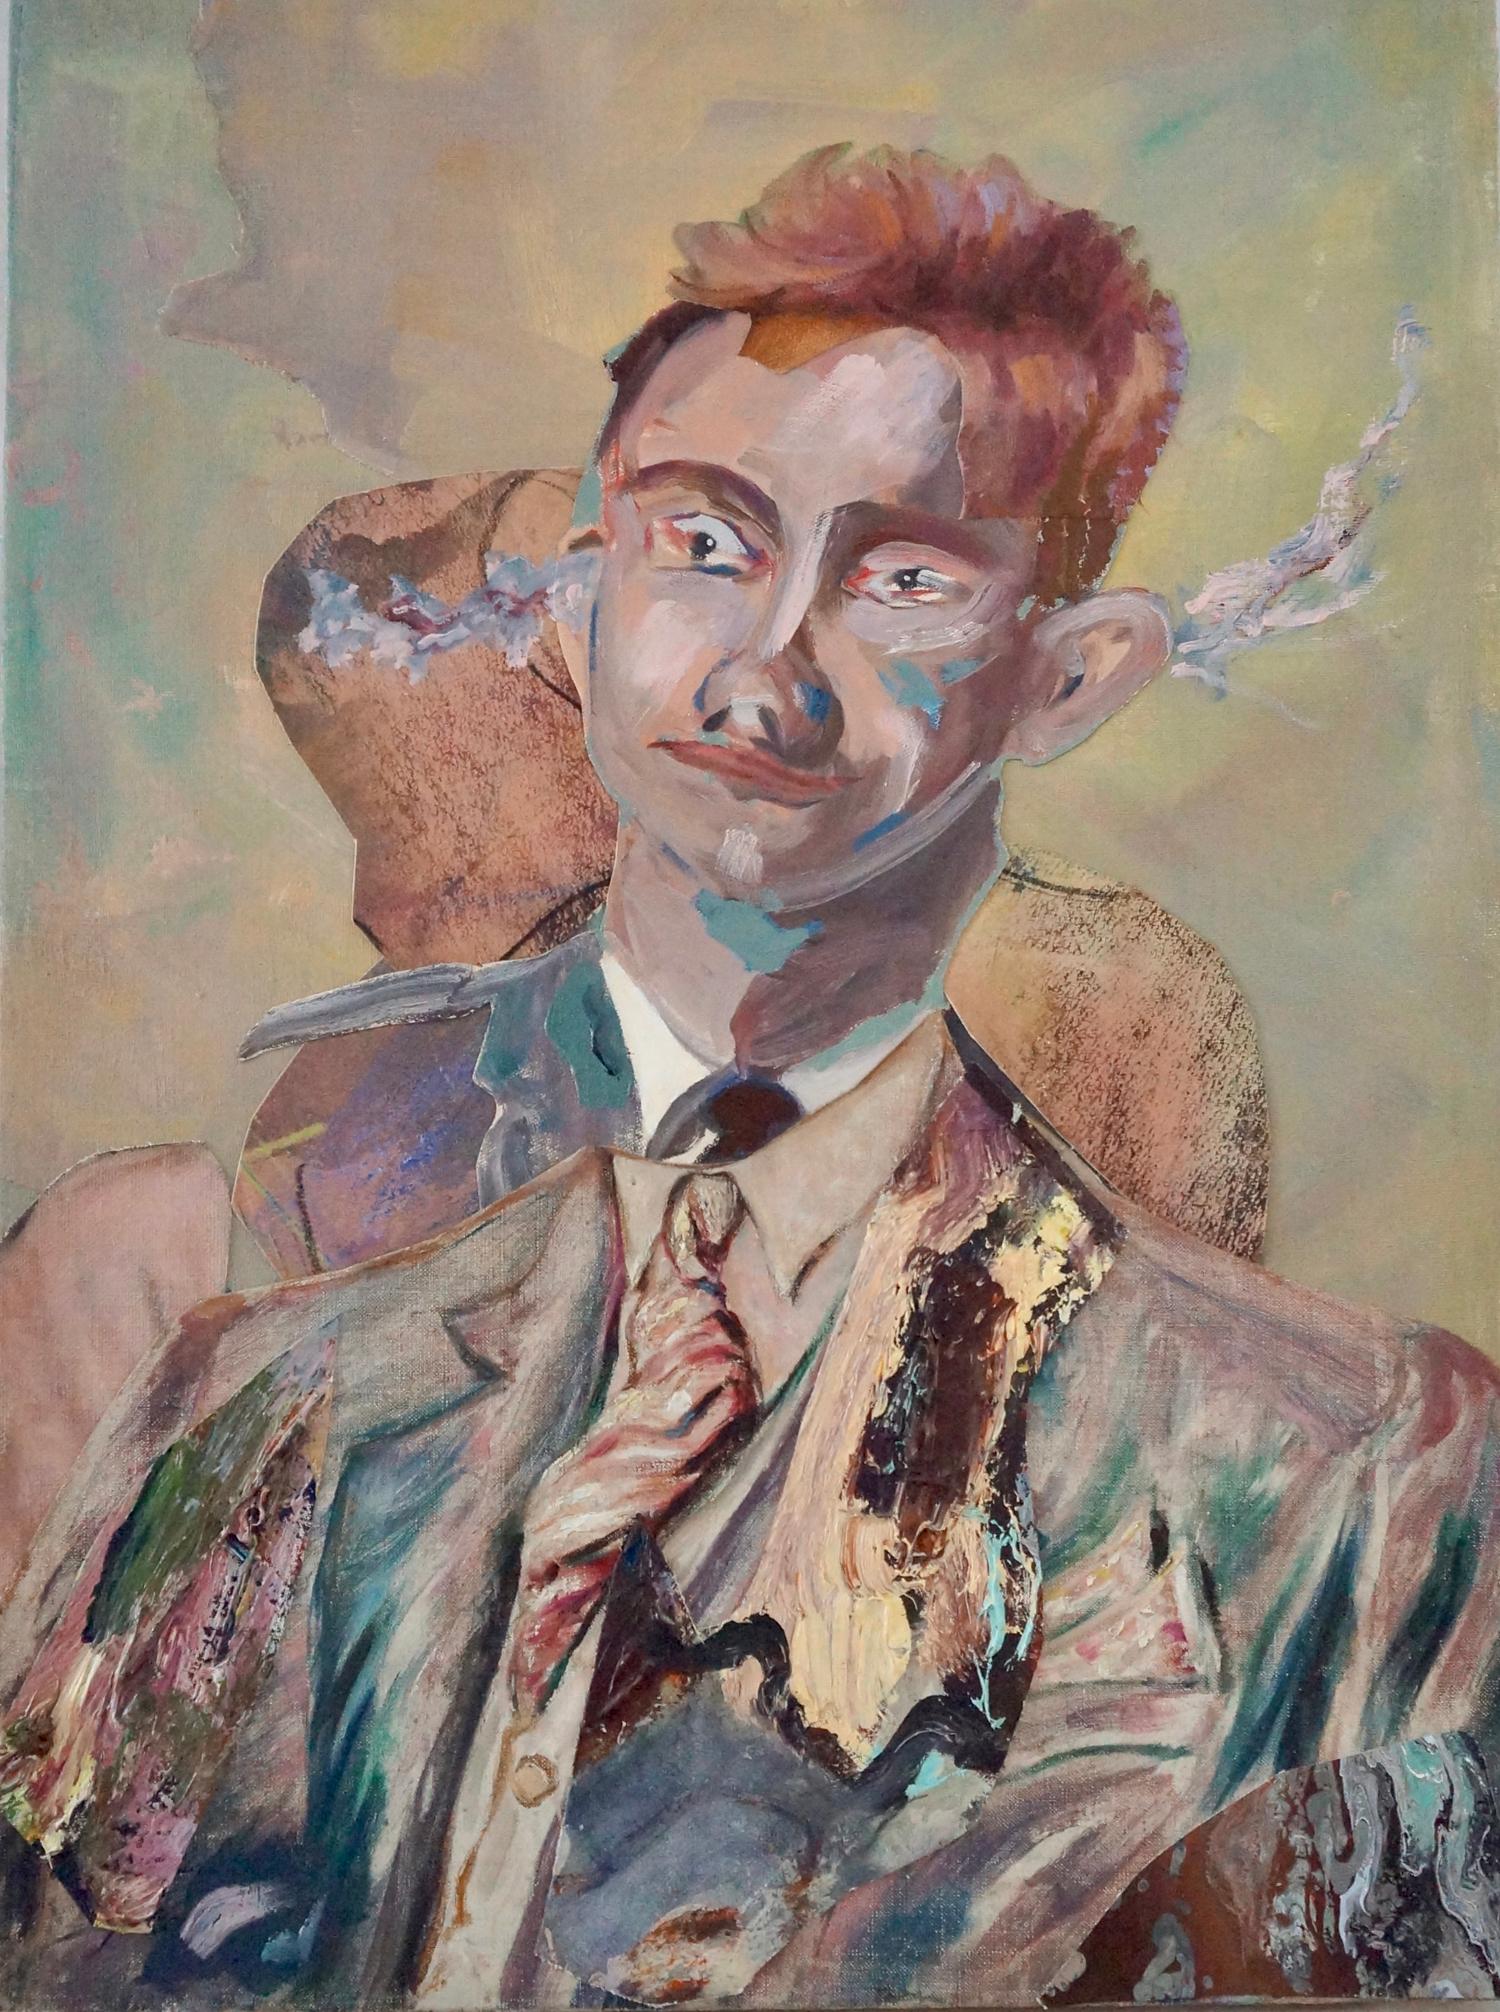 John Baker Figurative Painting - "In One Ear and Out the Other", portrait, pink, blue, collage, acrylic painting